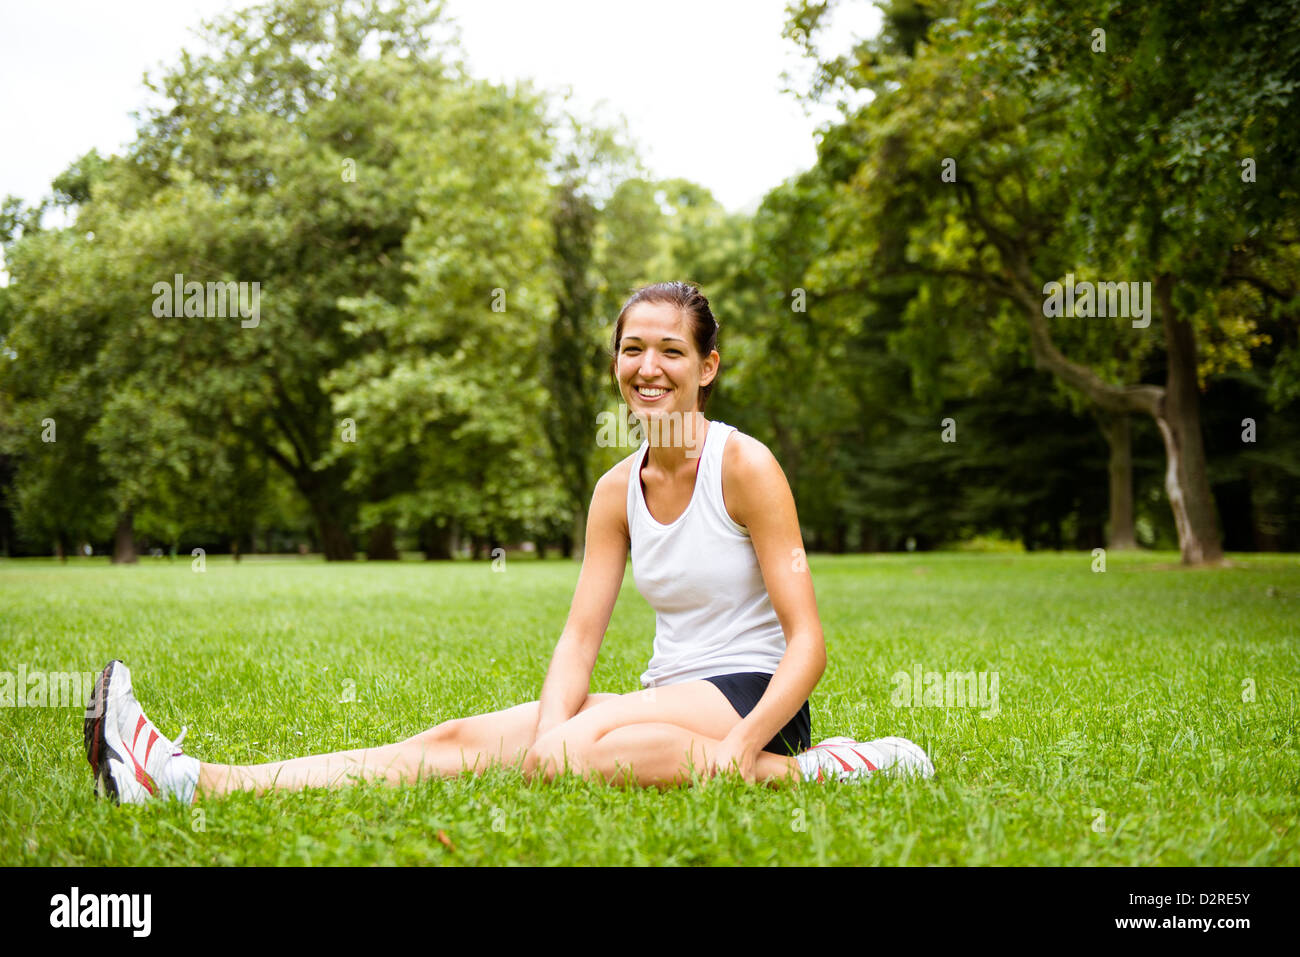 Young smiling fitness woman stretching muscles before sport activity Stock Photo